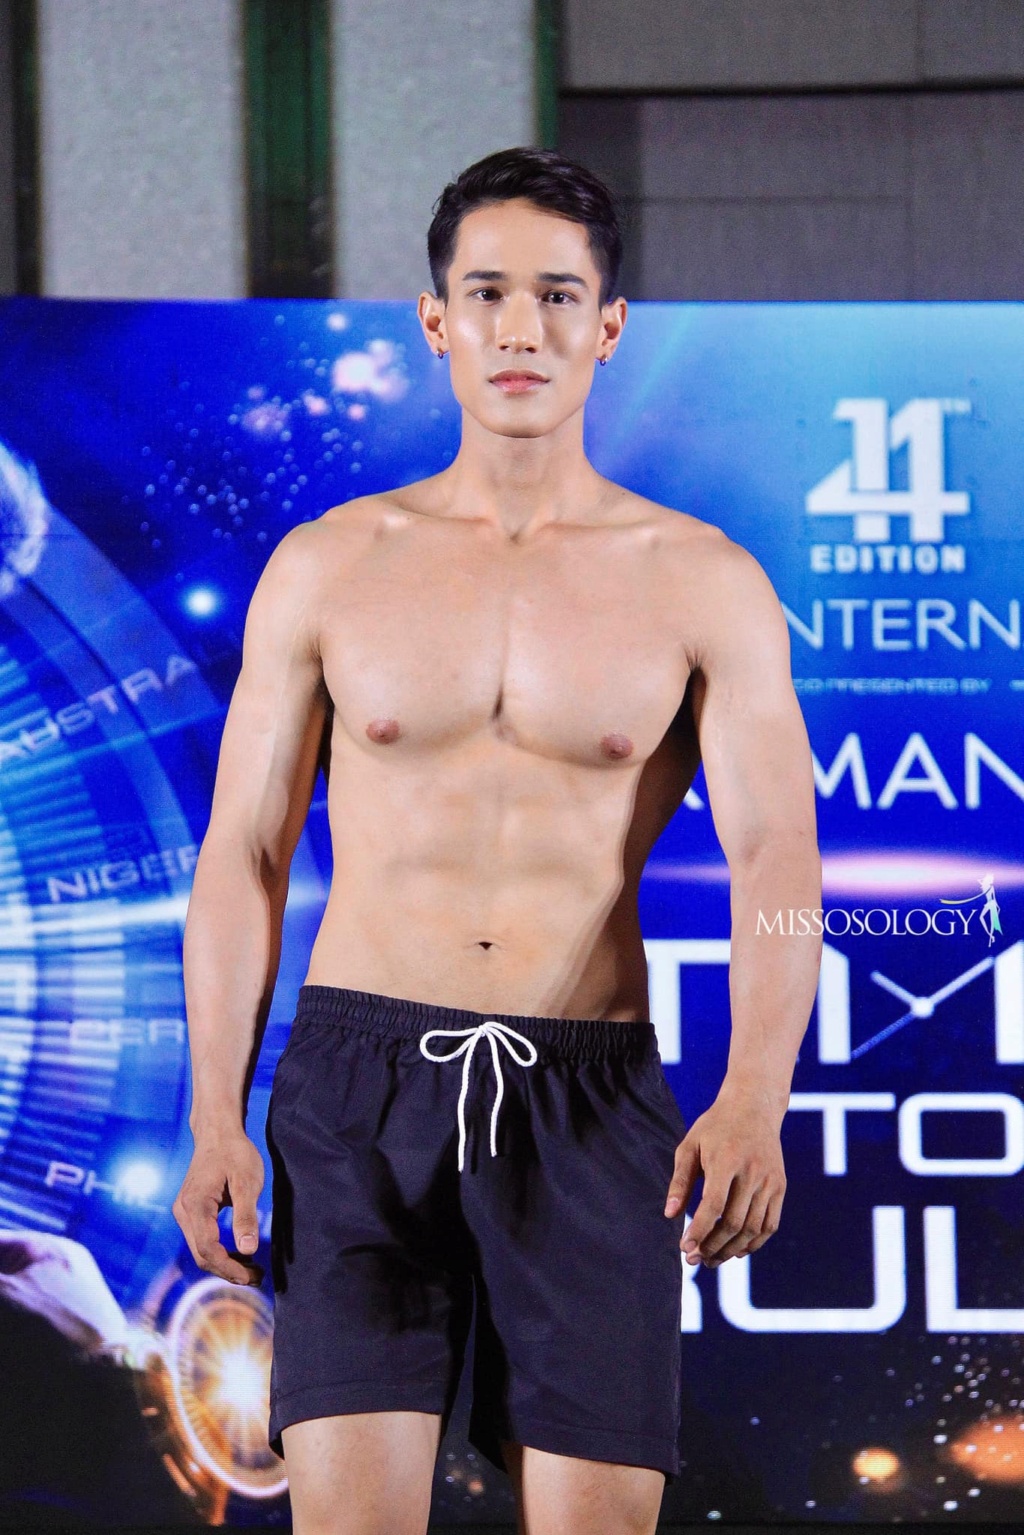 14th Mister International in Manila, Philippines - Oct 30th, 2022 - Winner is Dominican Republic 31280511